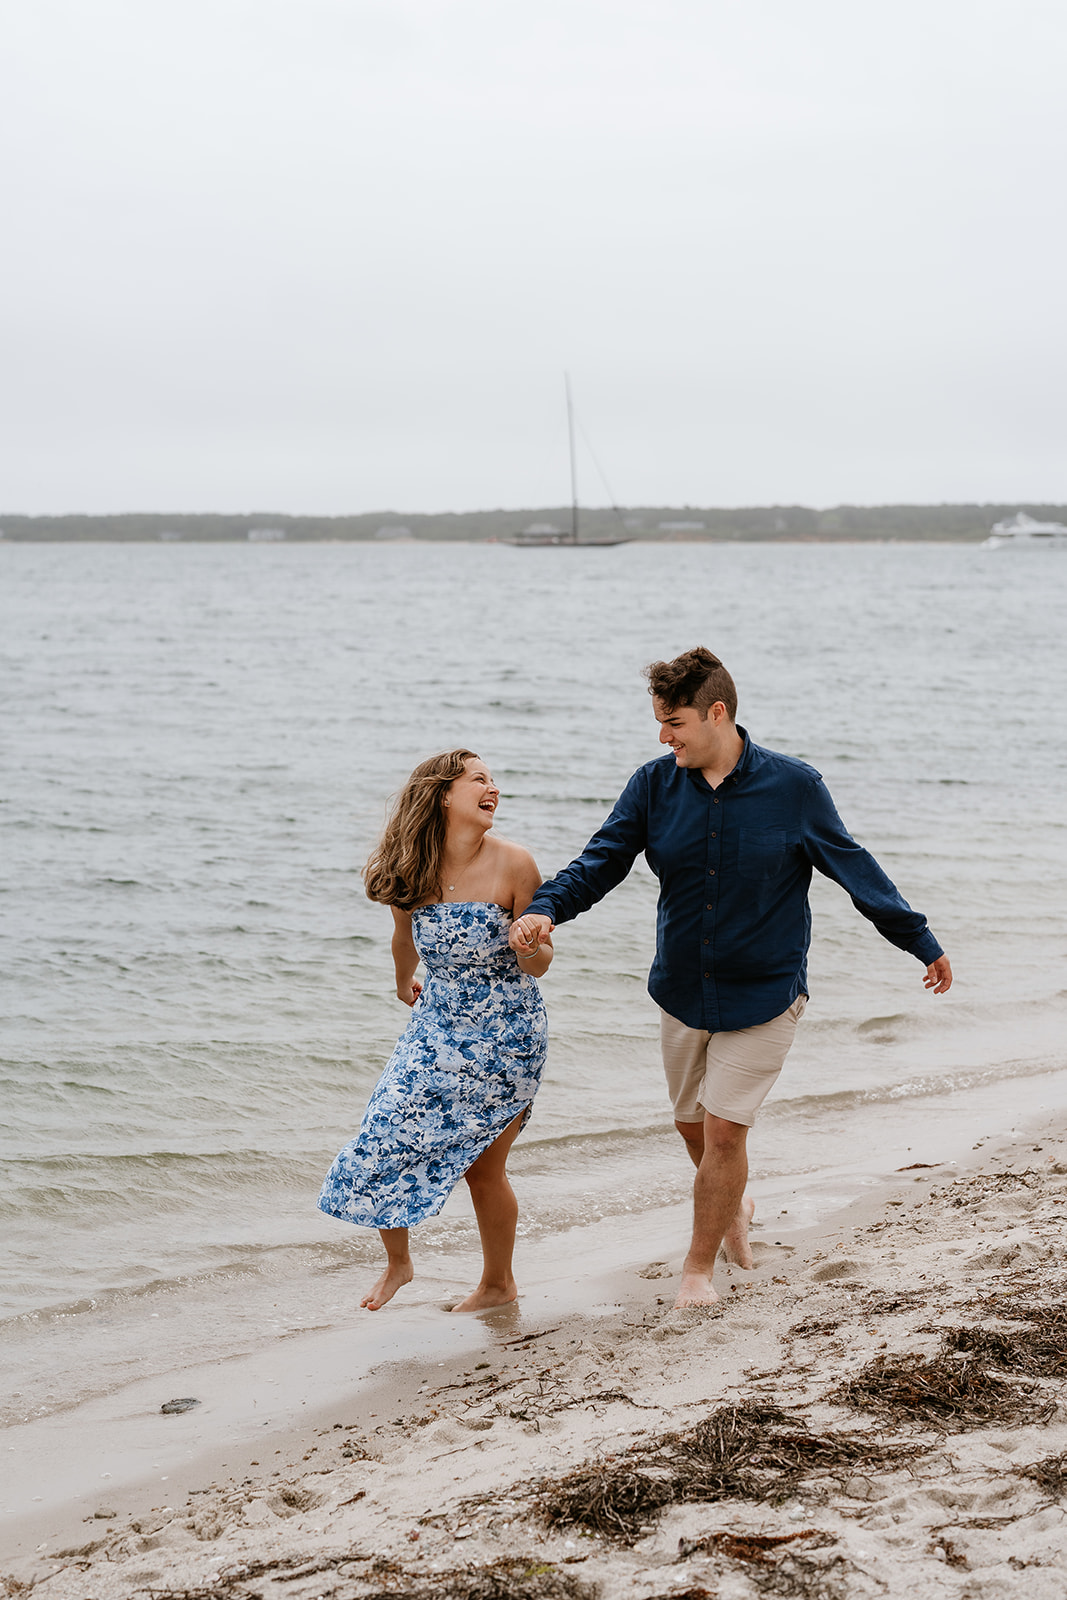 A couple holding hands and running barefoot along a sandy beach in Martha's Vineyard with boats in the background.